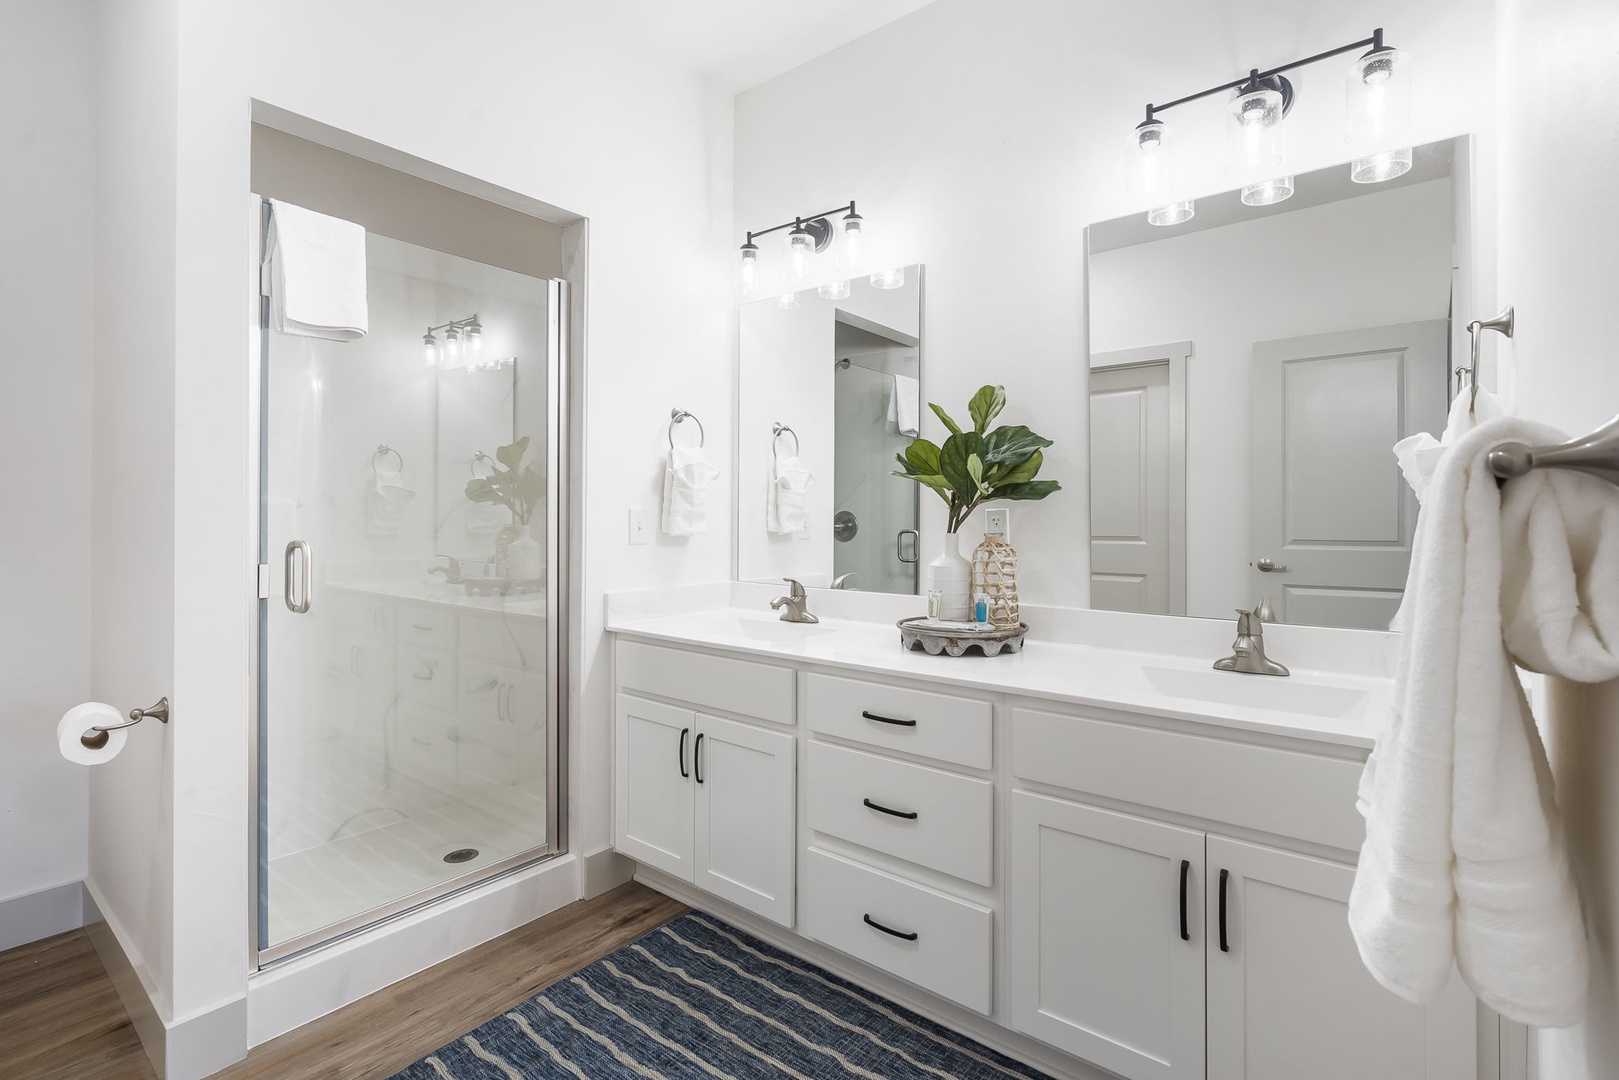 Find a spacious double vanity and spa-like glass shower in the king en suite